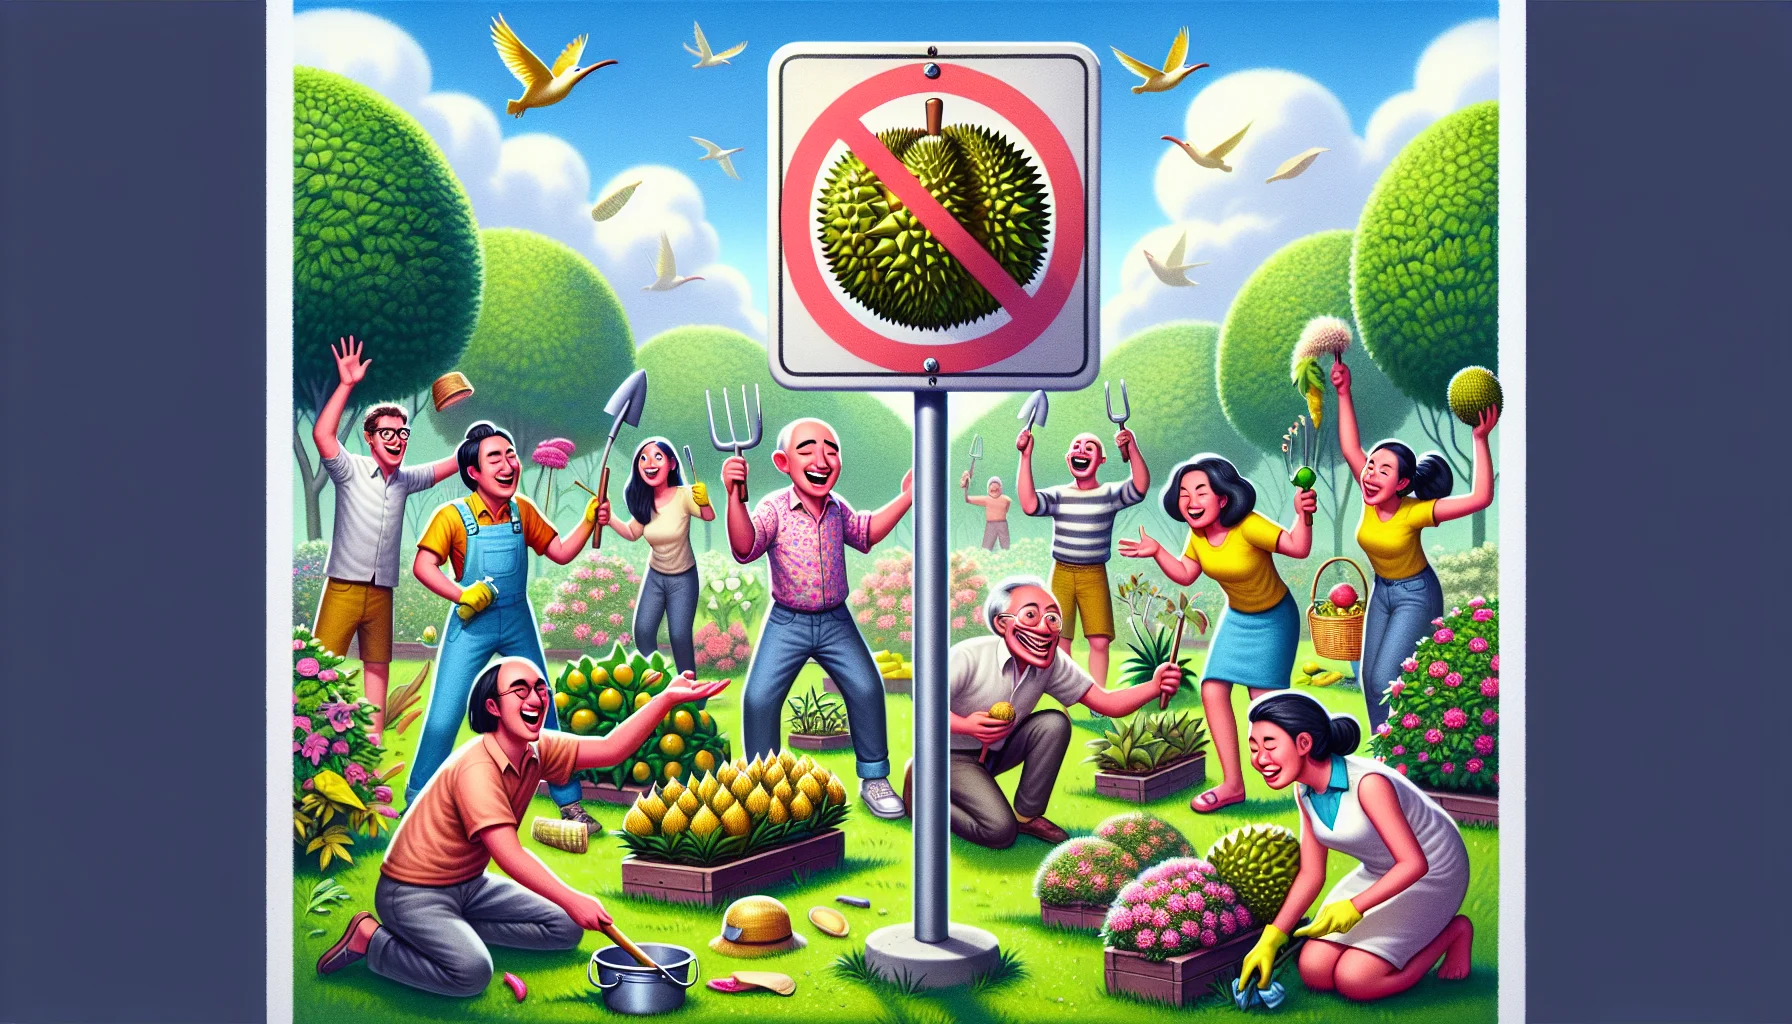 A humorous scene is set in a public park. To our surprise, there's a large prohibitory sign of a durian fruit indicating it's banned, perhaps due to its notorious smell! Just beside the sign, a dynamic array of people of various descents like Caucasian, Hispanic, South Asian are engaging in the joyous activity of gardening. They are tending to a beautiful variety of plants, flowers, and fruits other than durian, their faces filled with delight. Reminiscent of a sunny day, this scene promotes gardening as an all-inclusive, entertaining hobby.